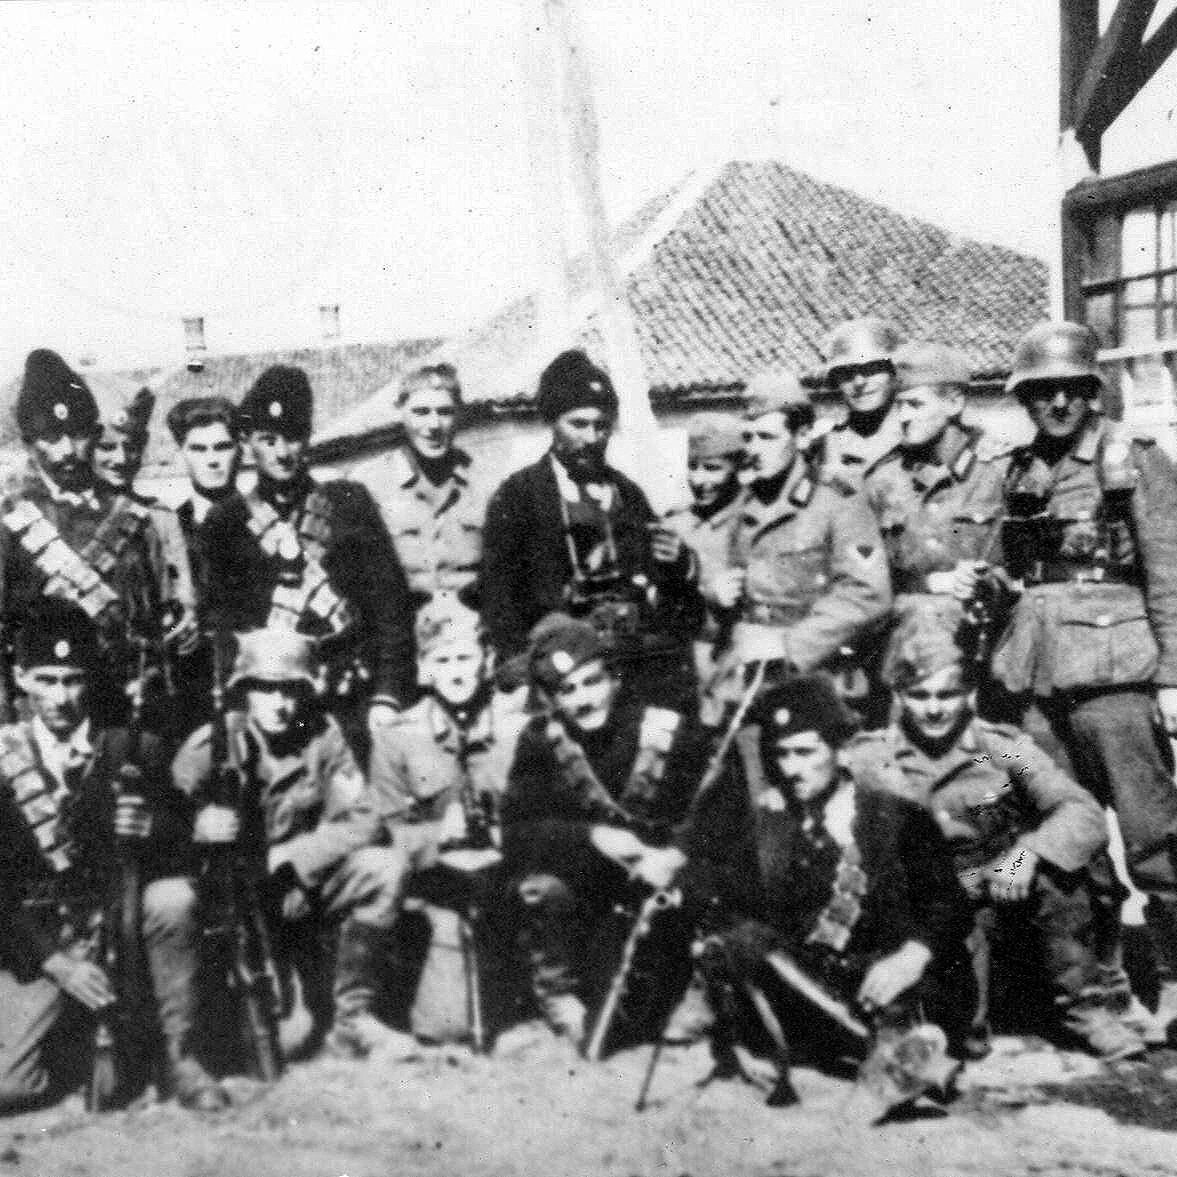 A group of Chetniks pose with German soldiers in an unidentified village in Serbia, Quelle: United States Holocaust Memorial Museum